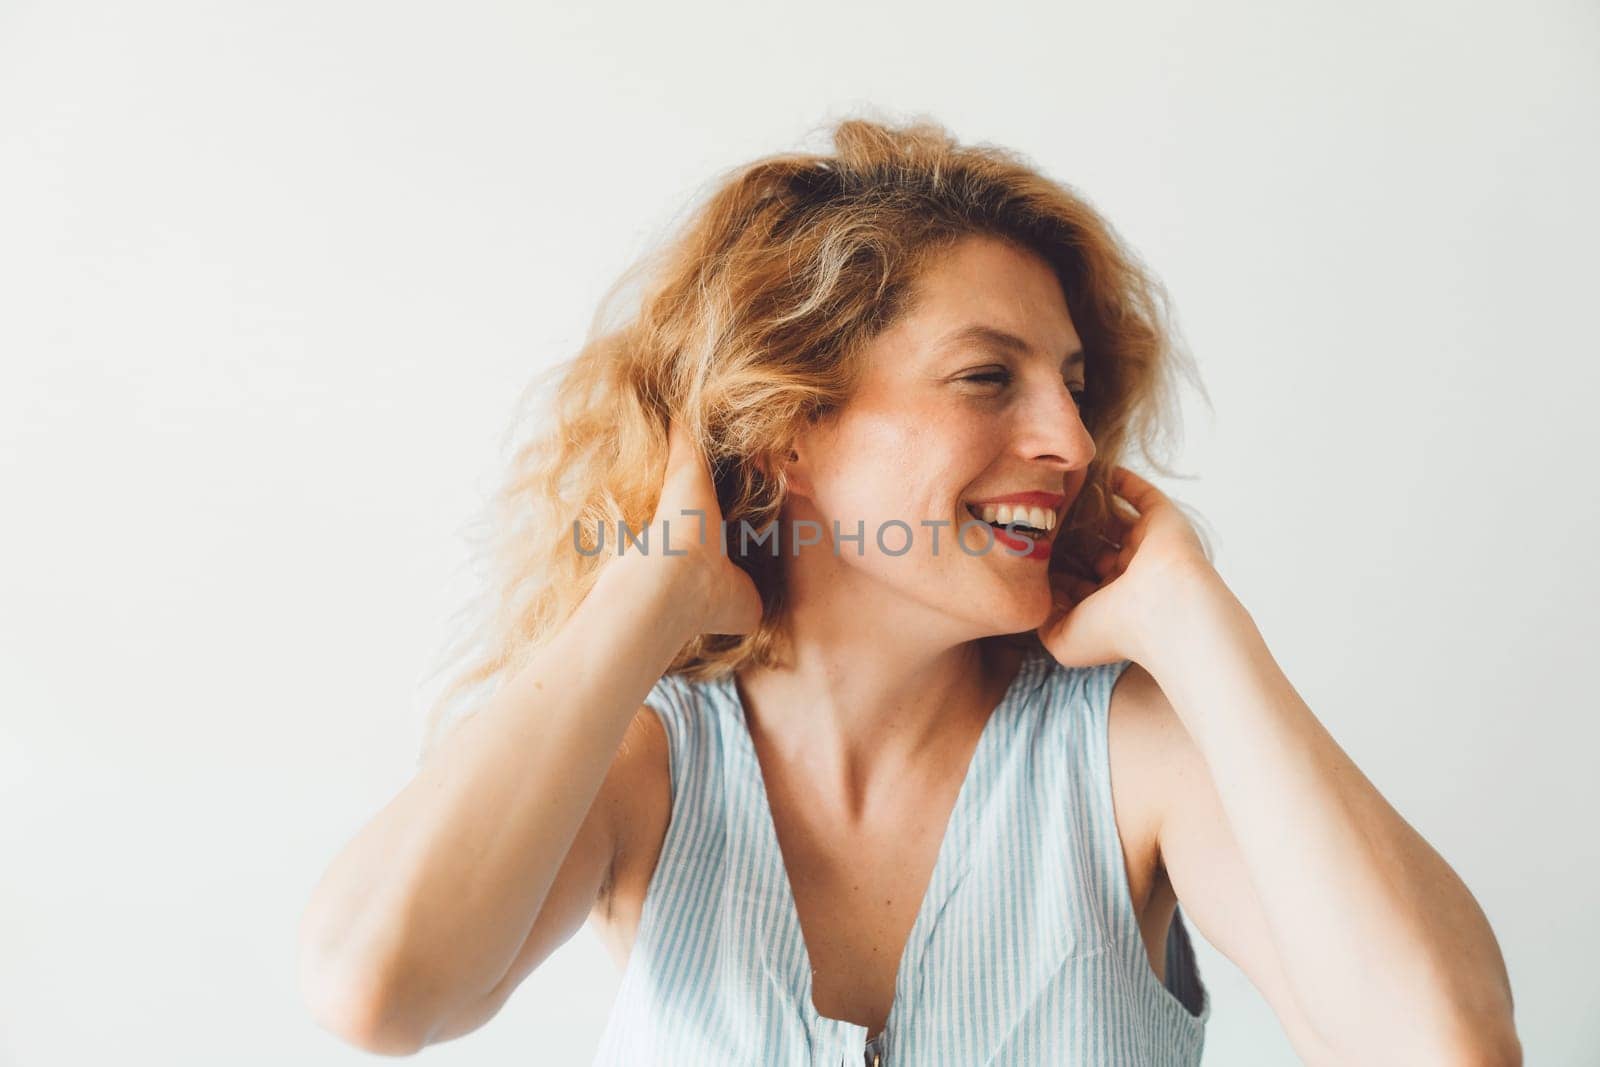 Portrait of a smiling woman playing with her hair on a white background by VisualProductions